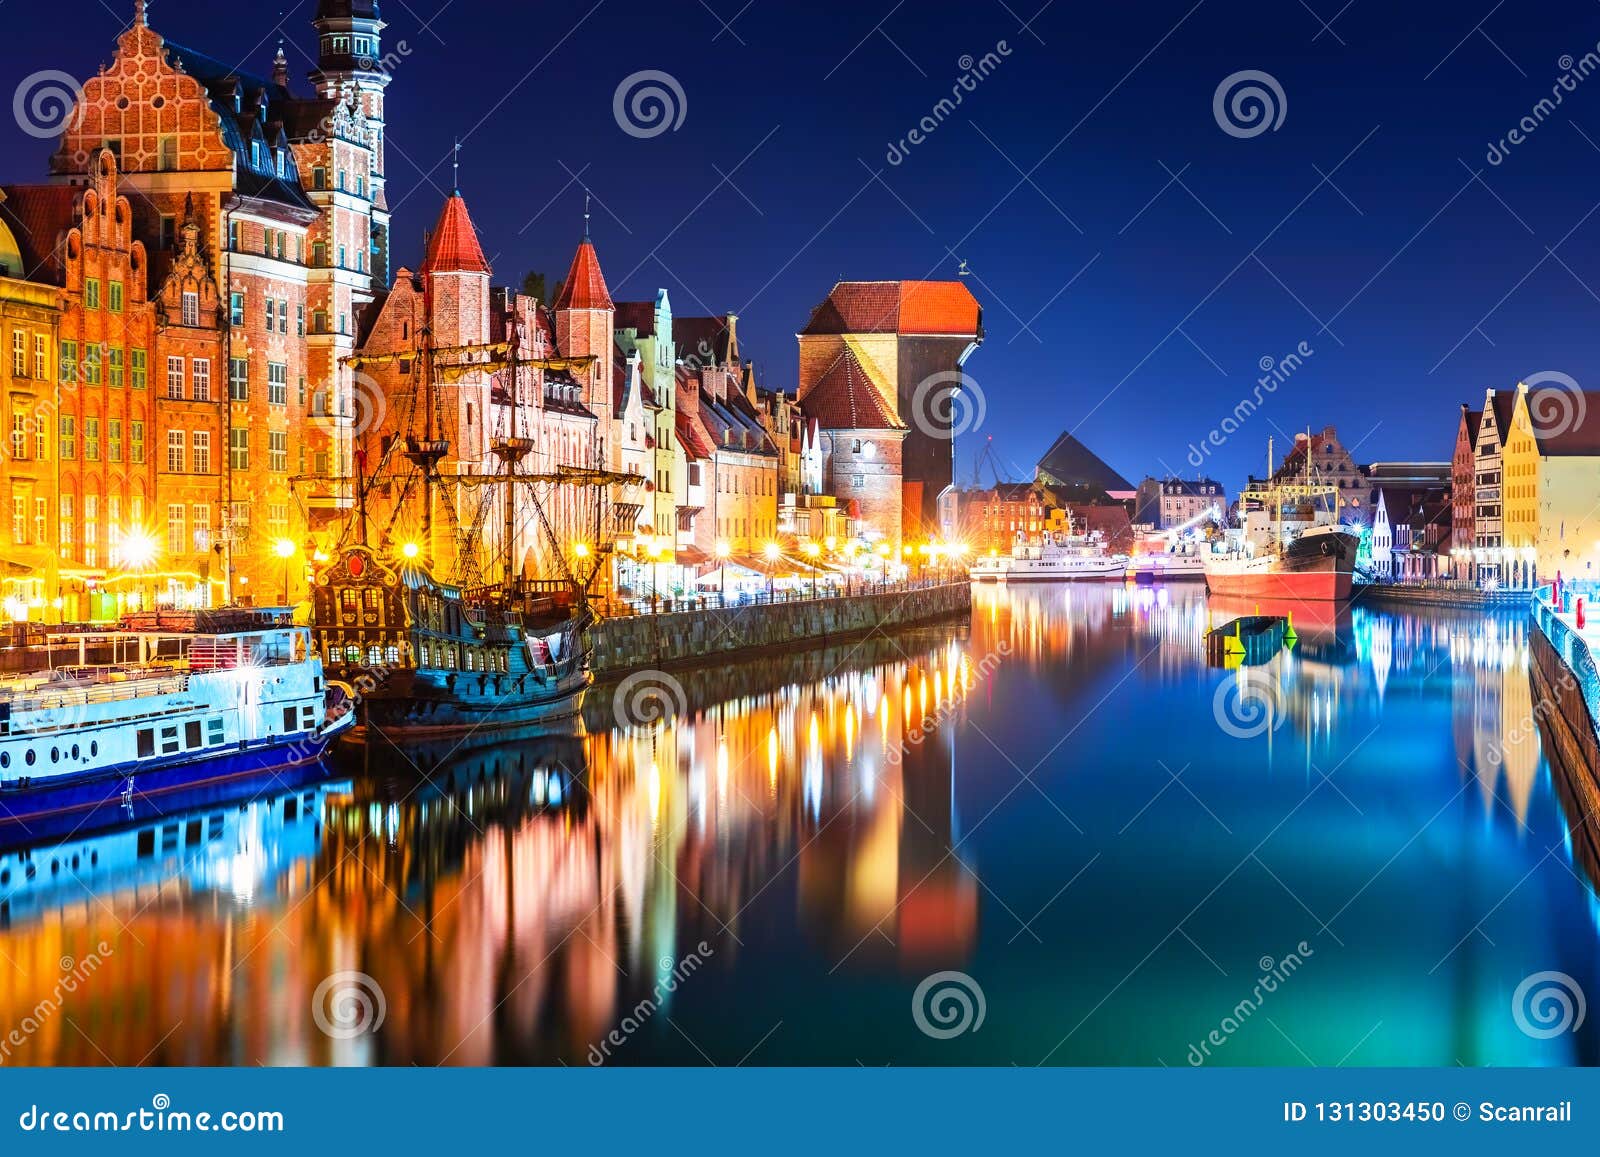 night view of the old town of gdansk, poland